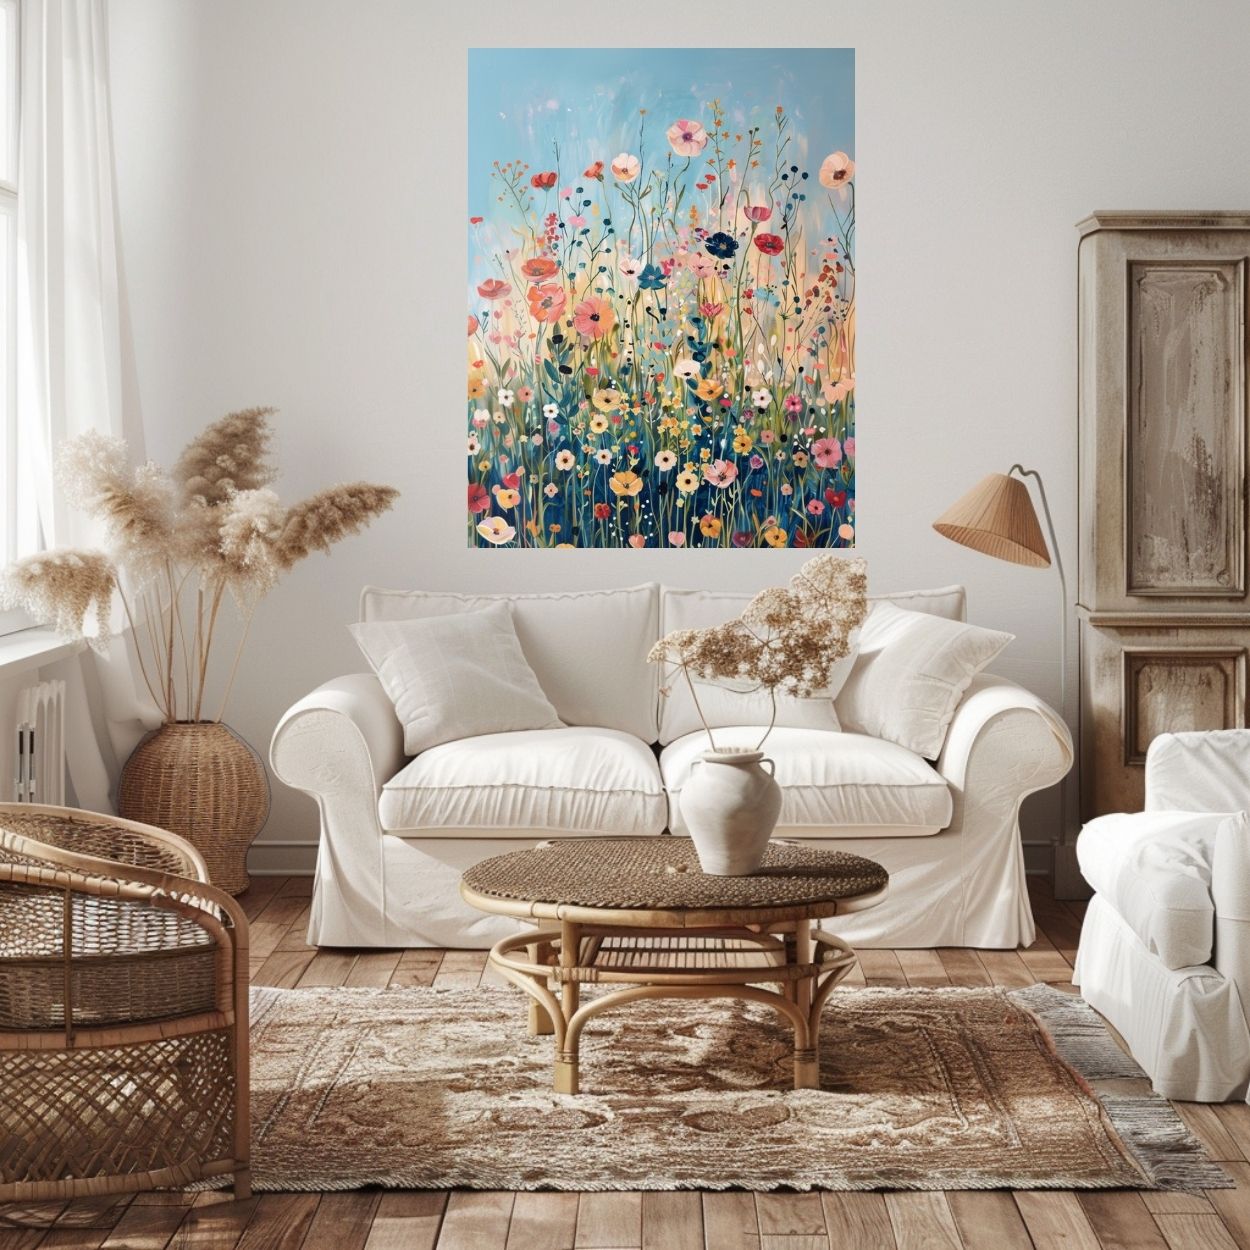 Product image showing canvas wall art of Wildflower Symphony - A Meadow of Lush Vibrant Blooms in a white living room.